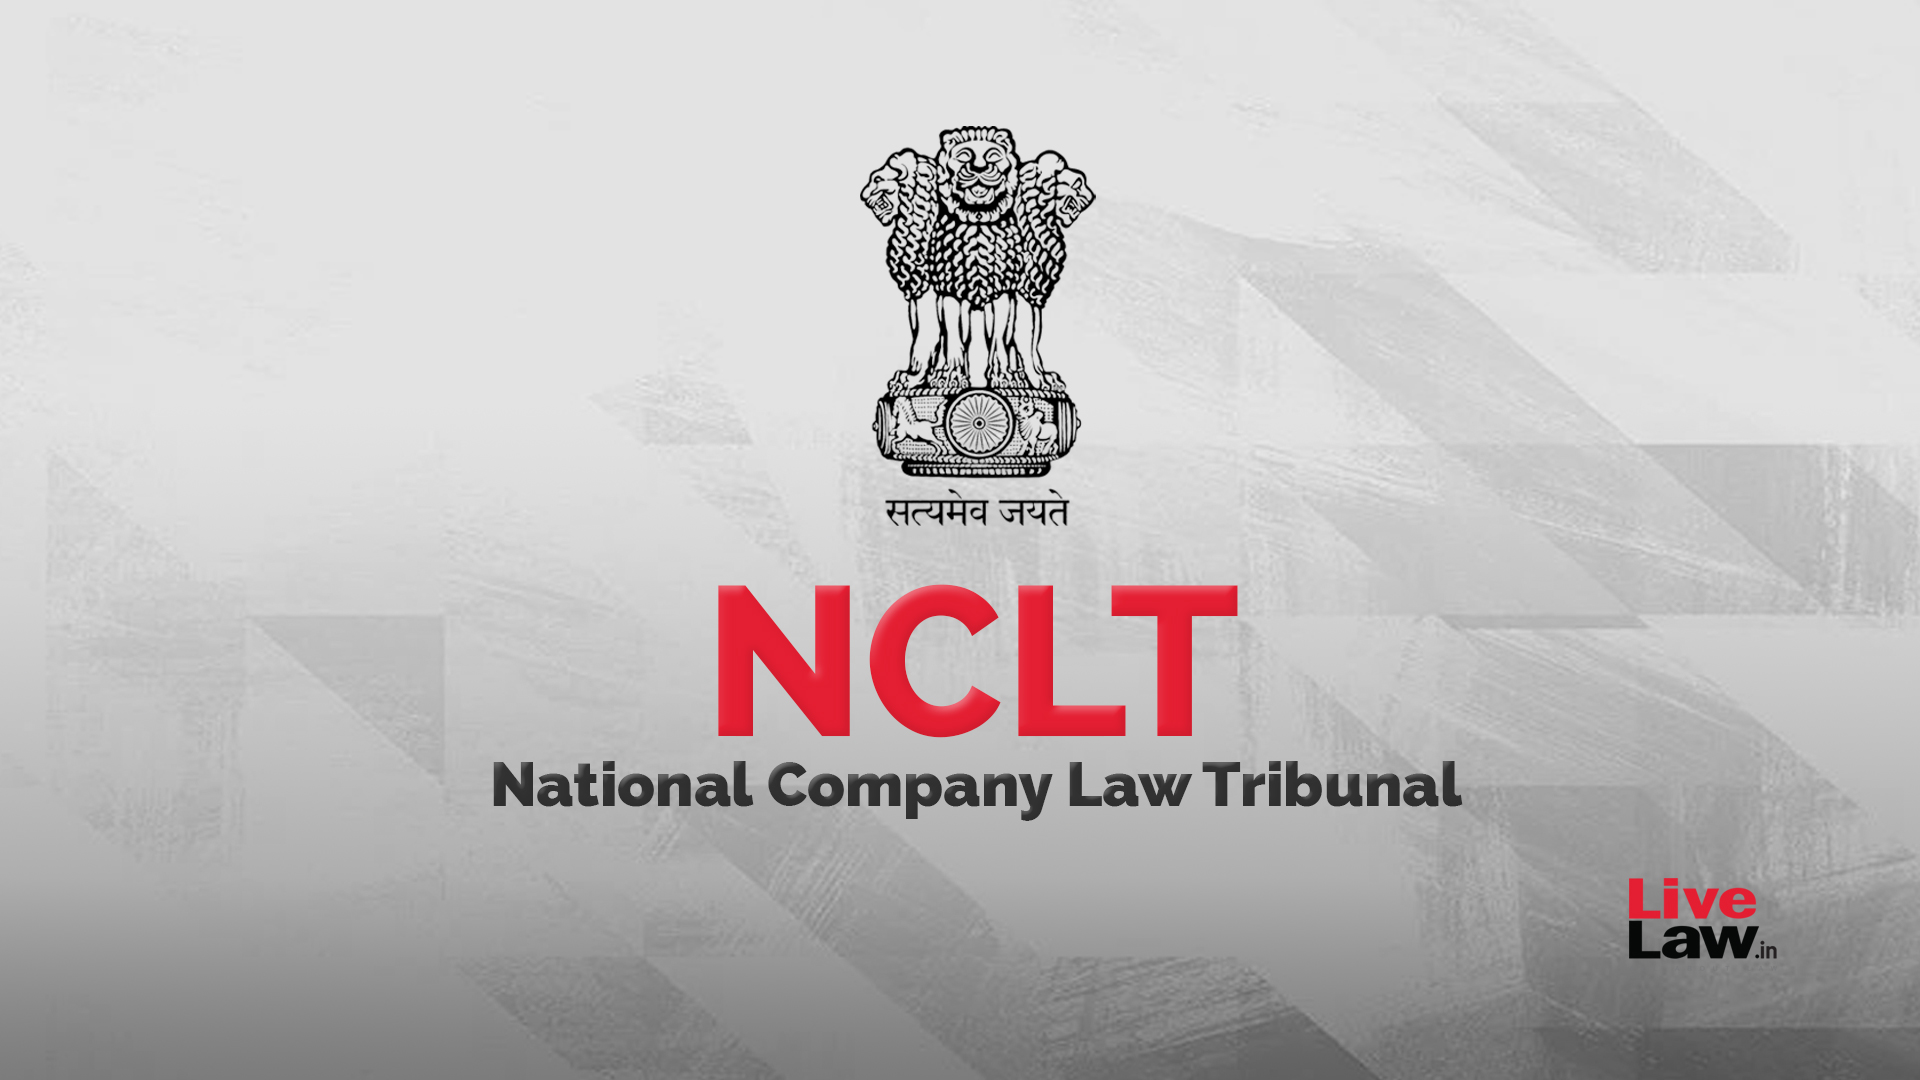 CIRP Can Be Initiated Based On An Unchallenged Arbitral Award: NCLT Kolkata